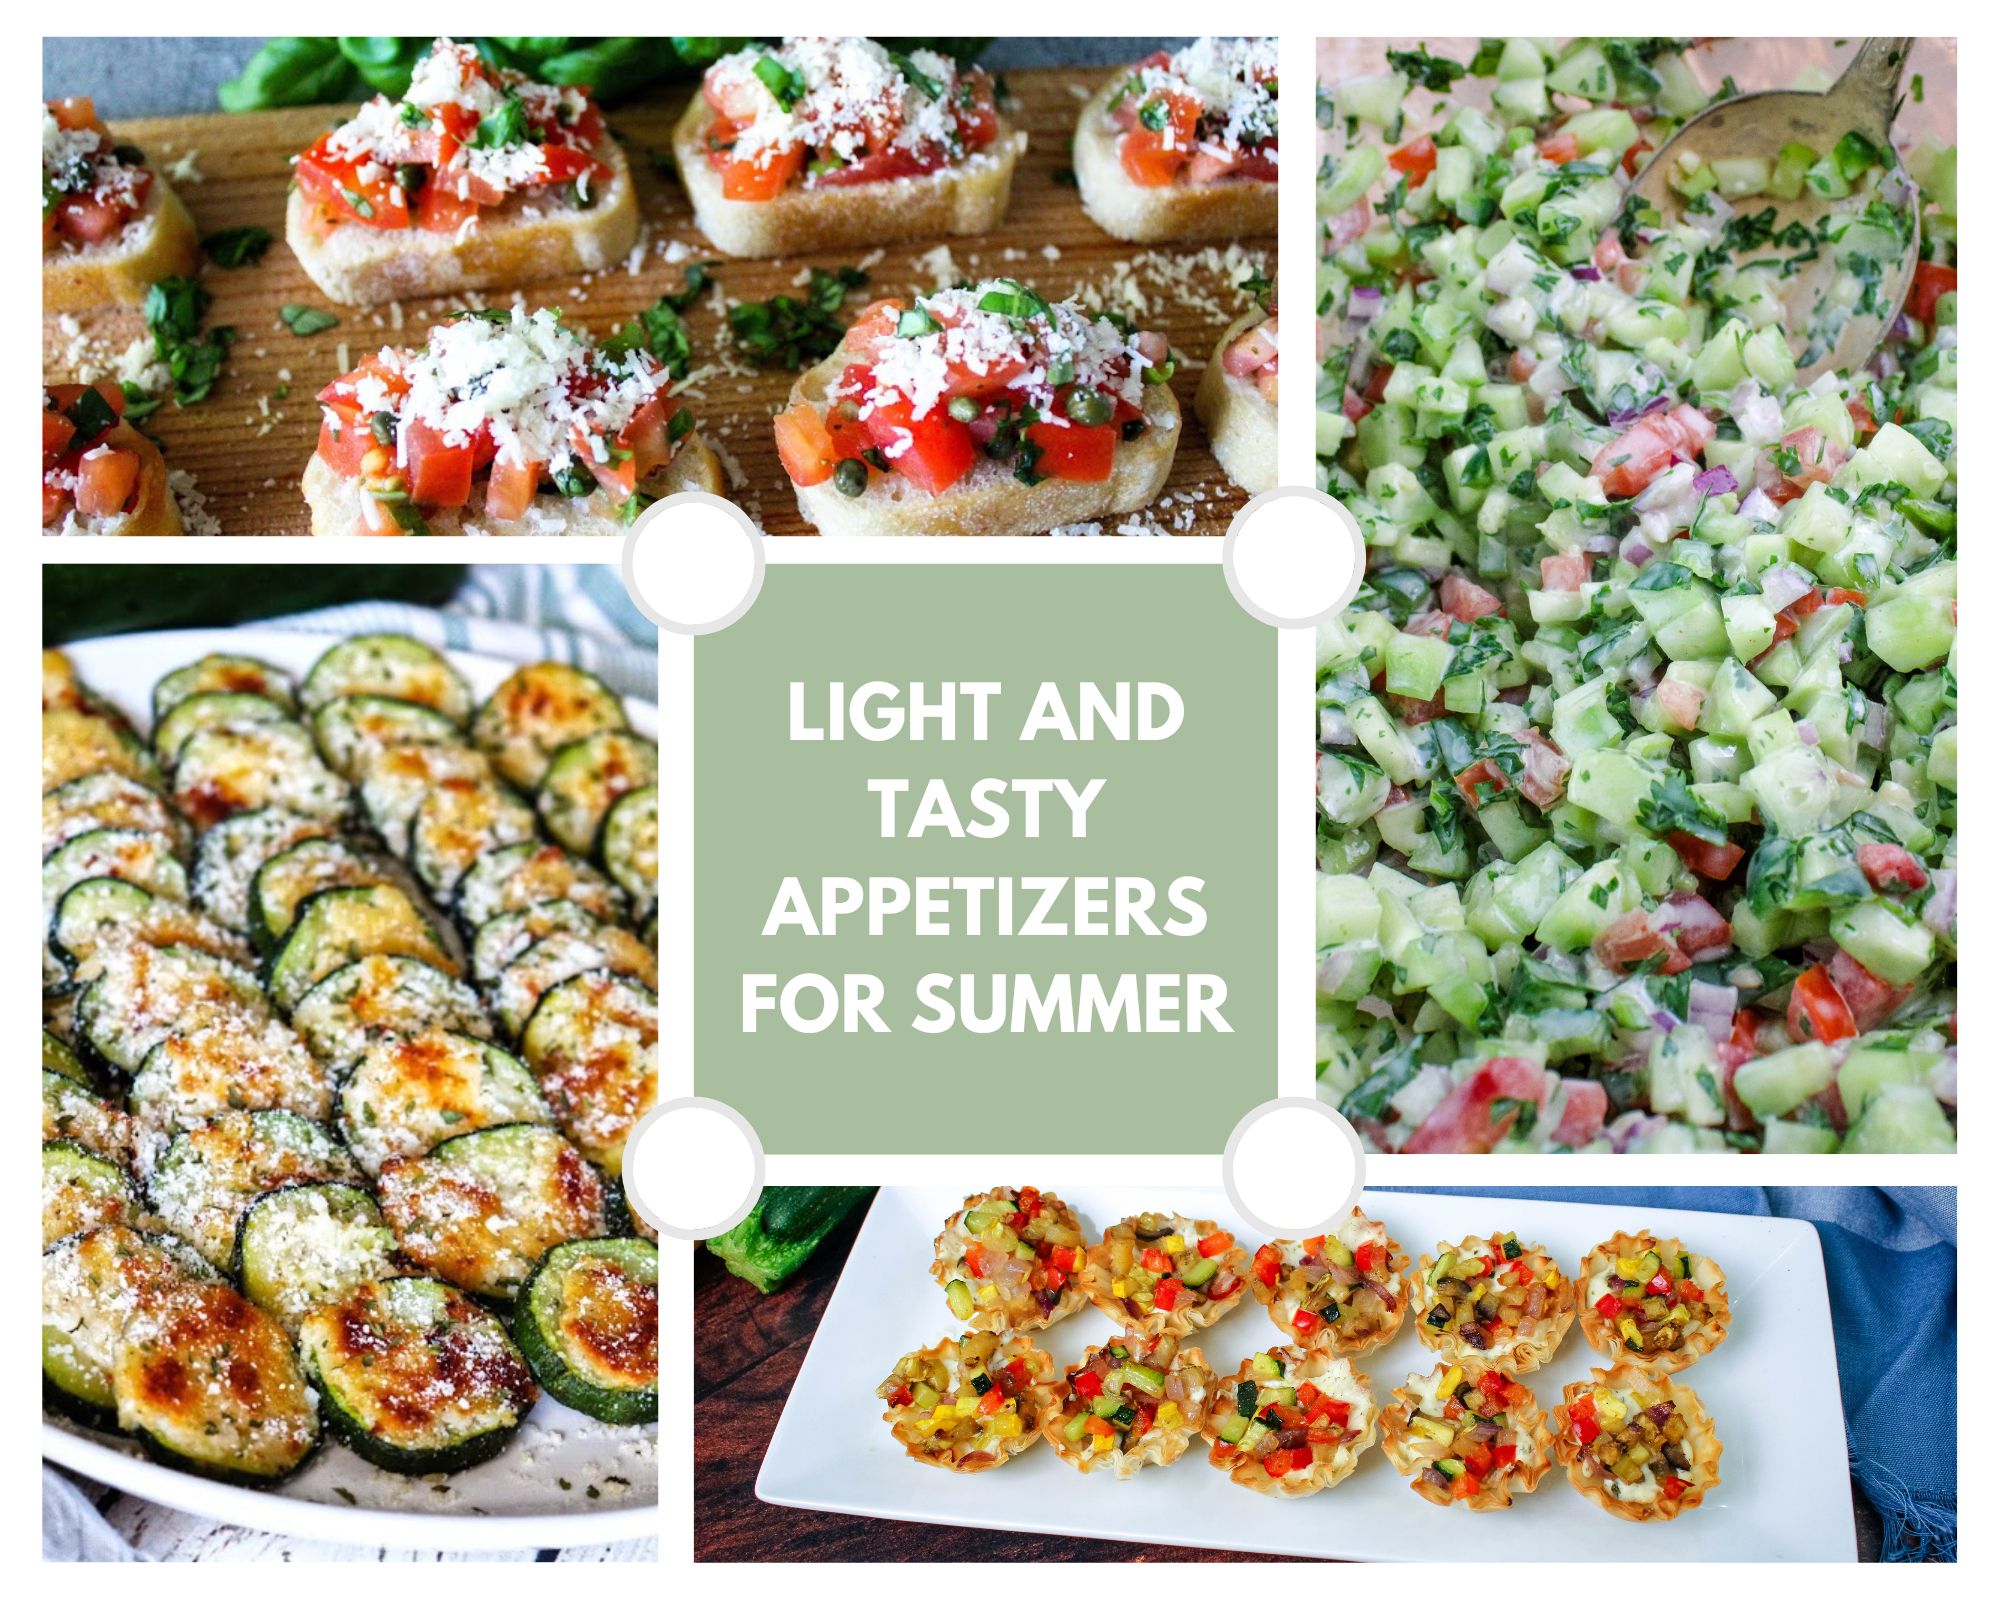 Light and Tasty Appetizers for Summer